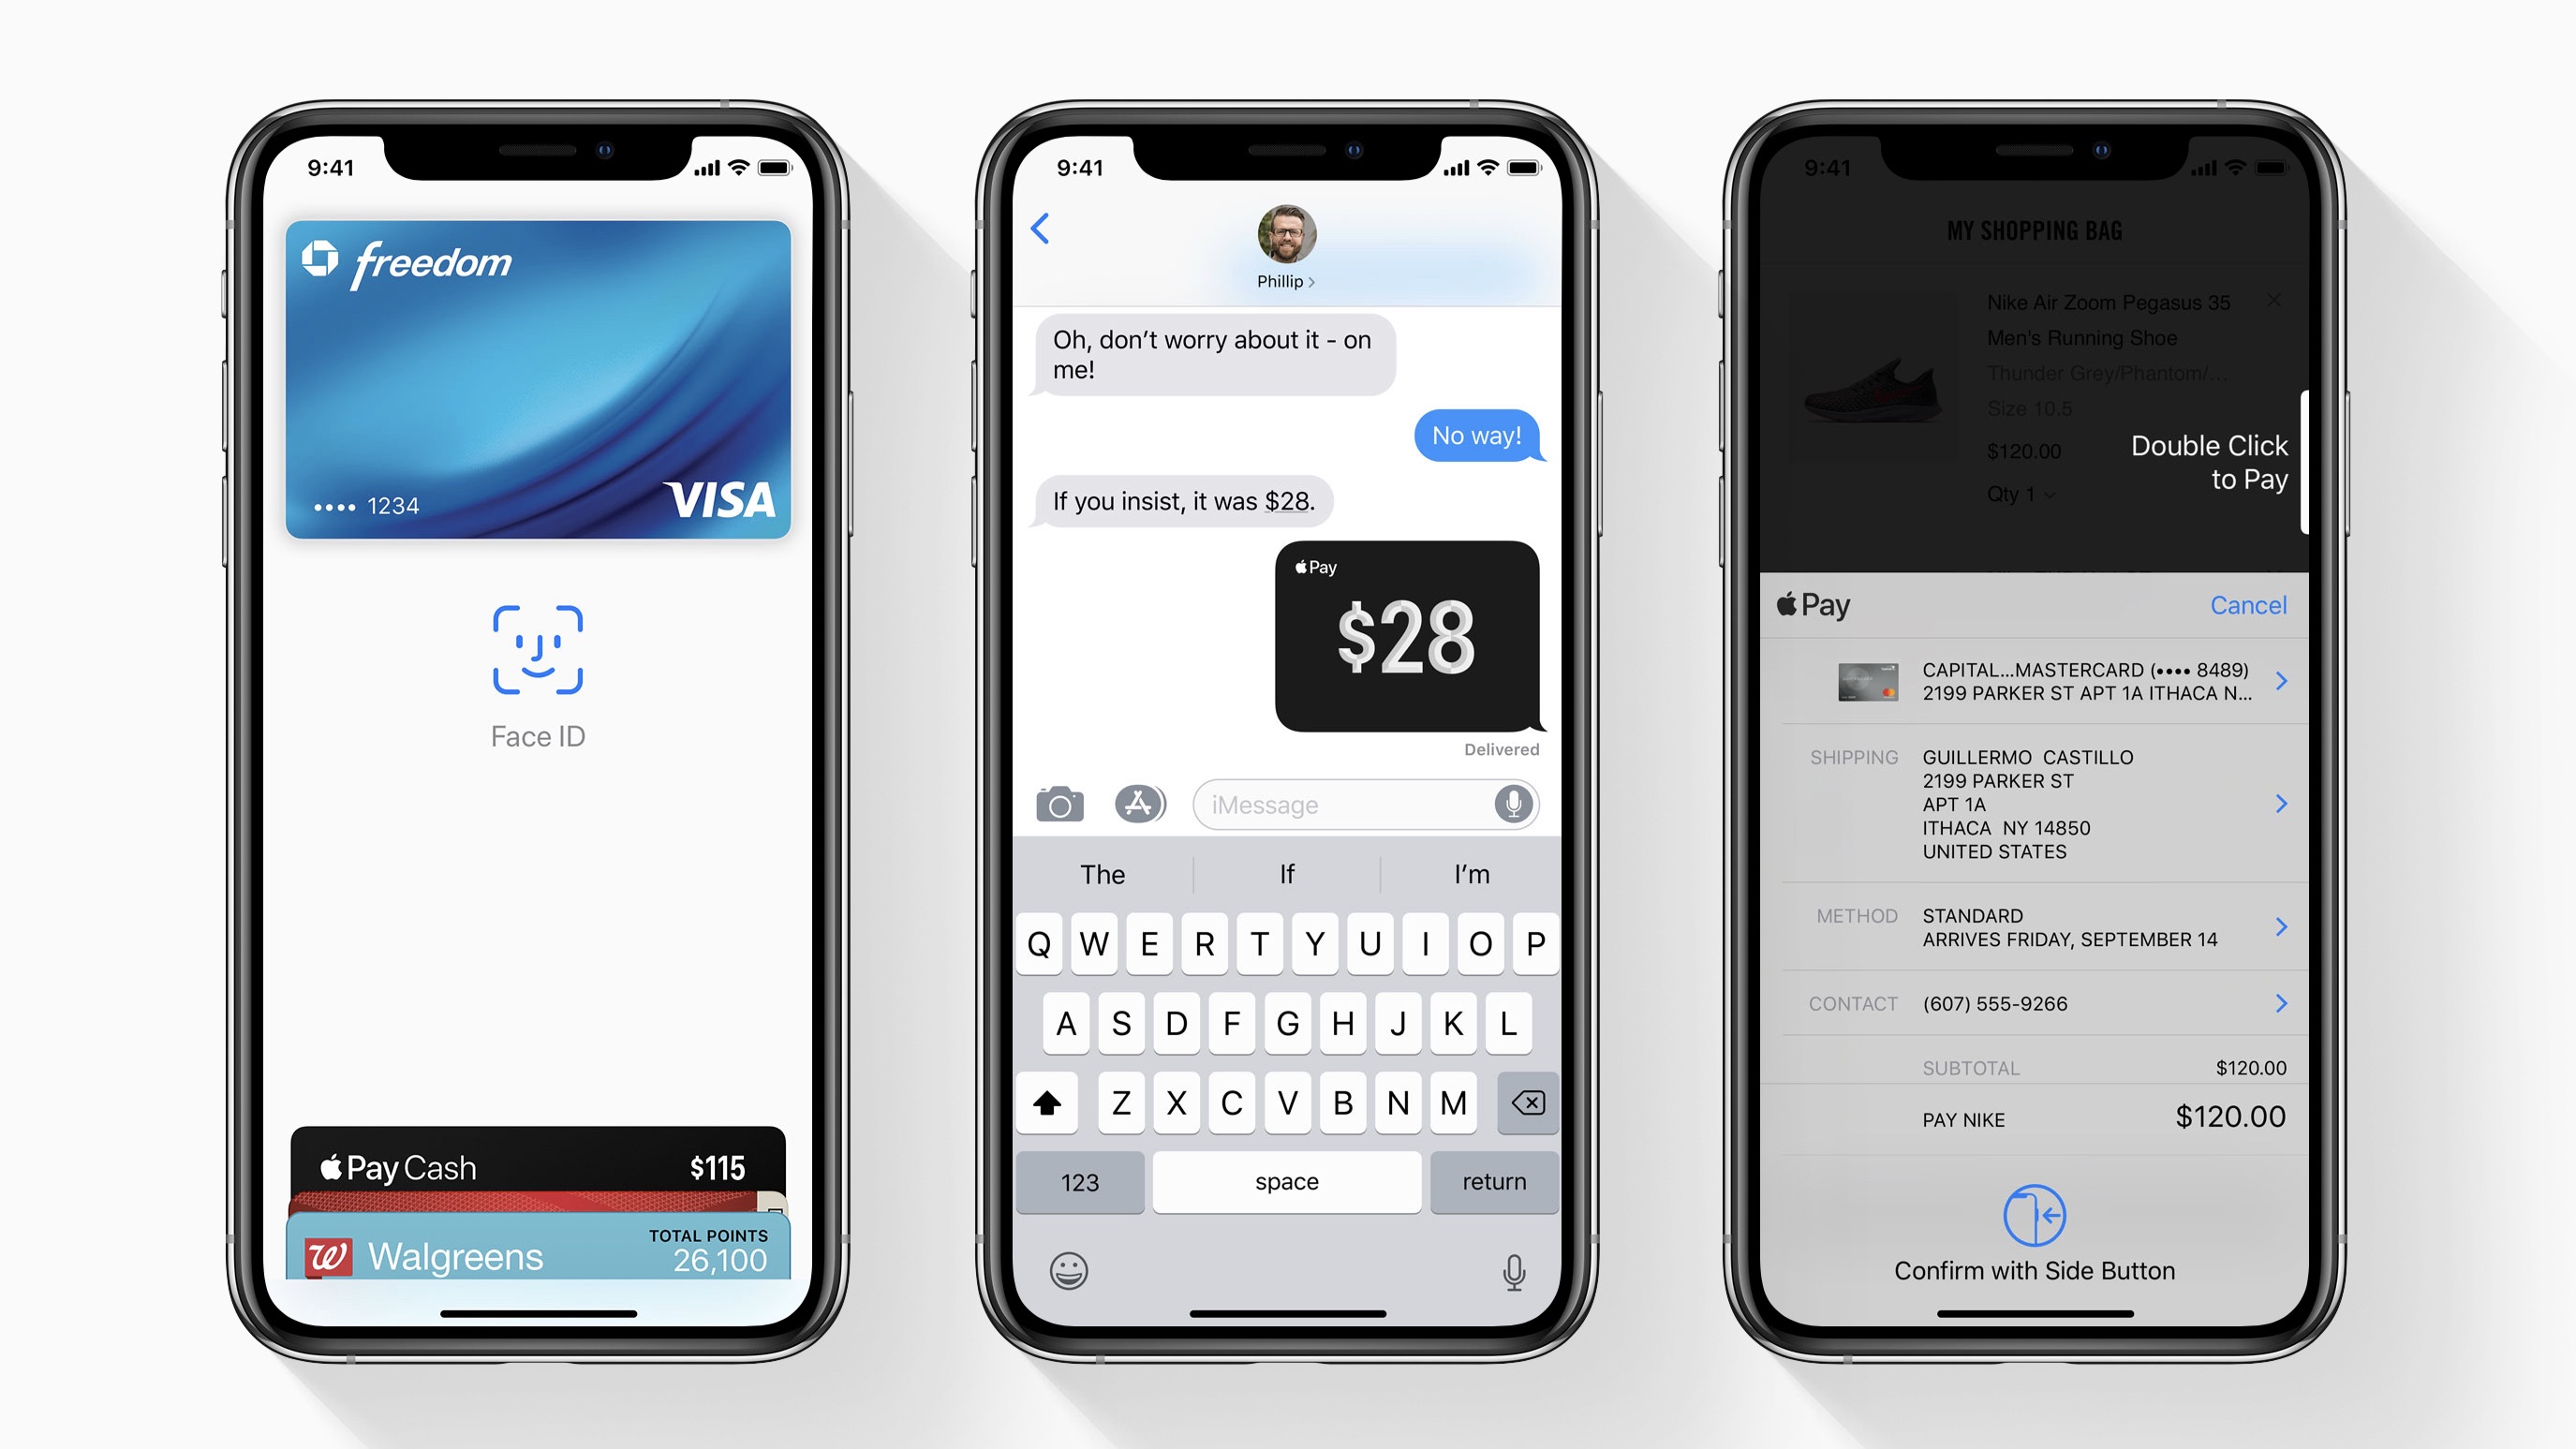 How do I use Wallet Pay on iPhone XR?